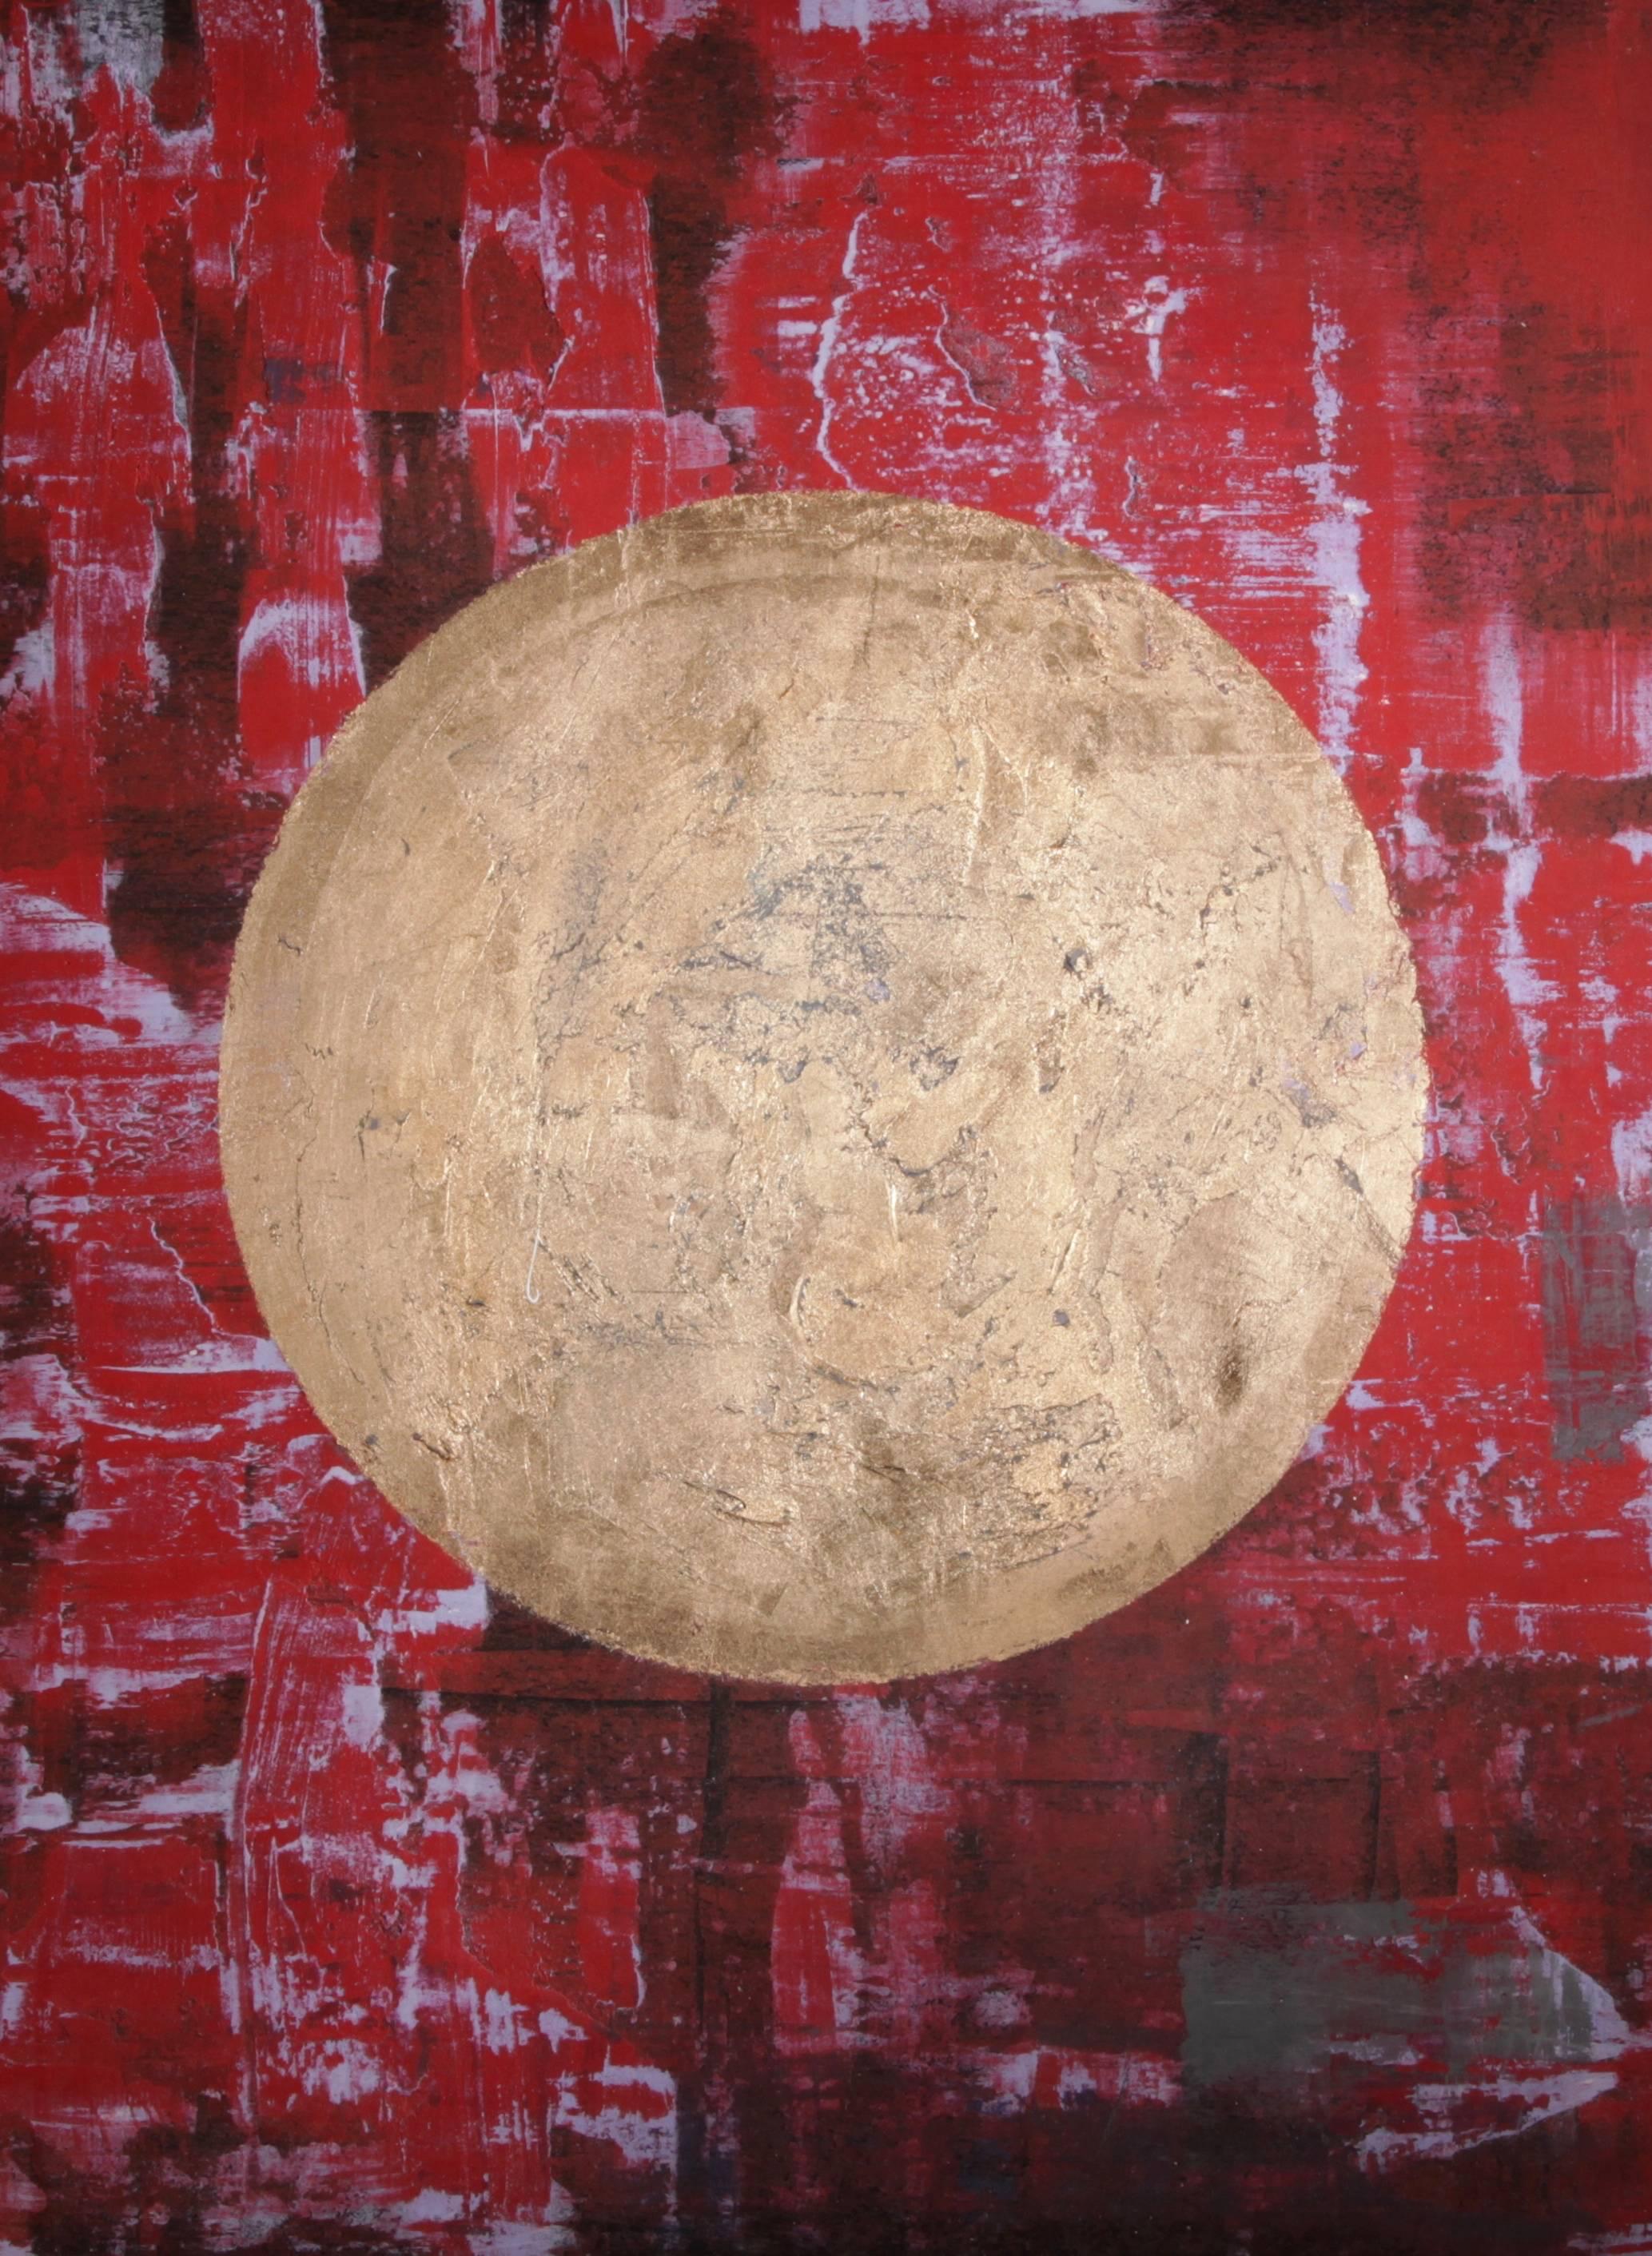 "Trenton" - abstract painting, red colors with gold planet  - Mixed Media Art by David Aiu Servan-Schreiber